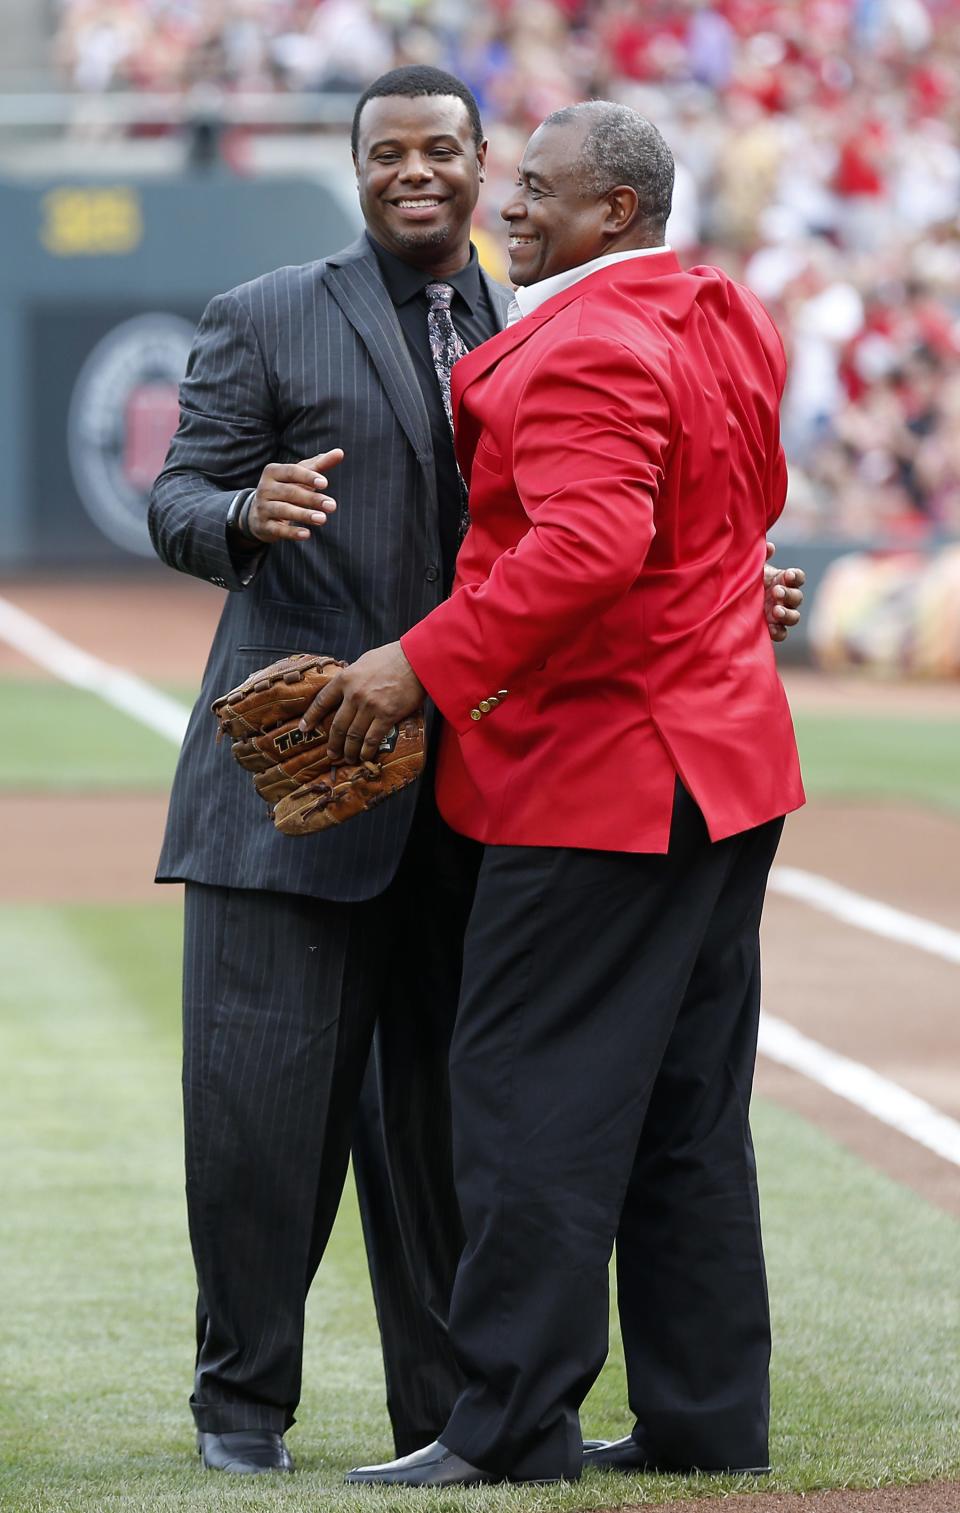 Reds Hall of Famer Ken Griffey Sr. (right) embraces his son, Ken Jr., during his son's Reds Hall of Fame induction ceremony.